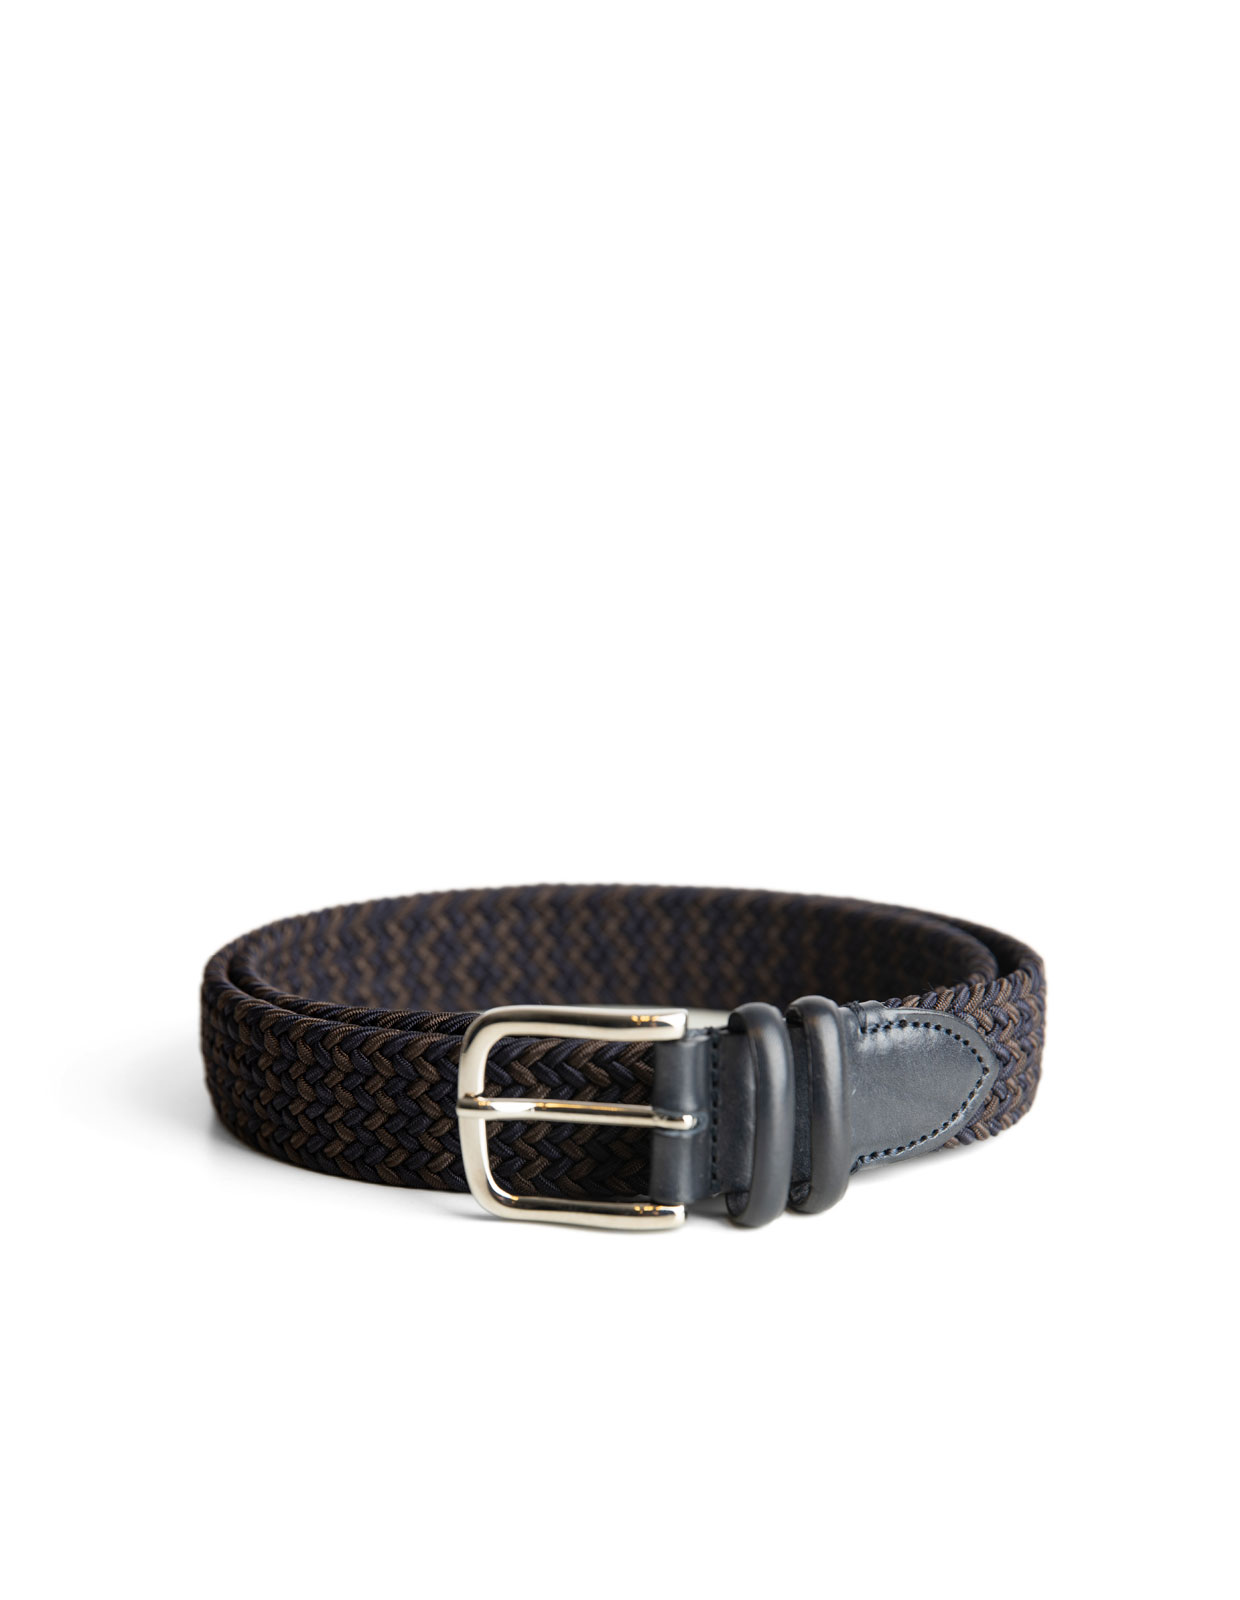 Woven Stretched Rayon Belt Navy/Brown Stl 85